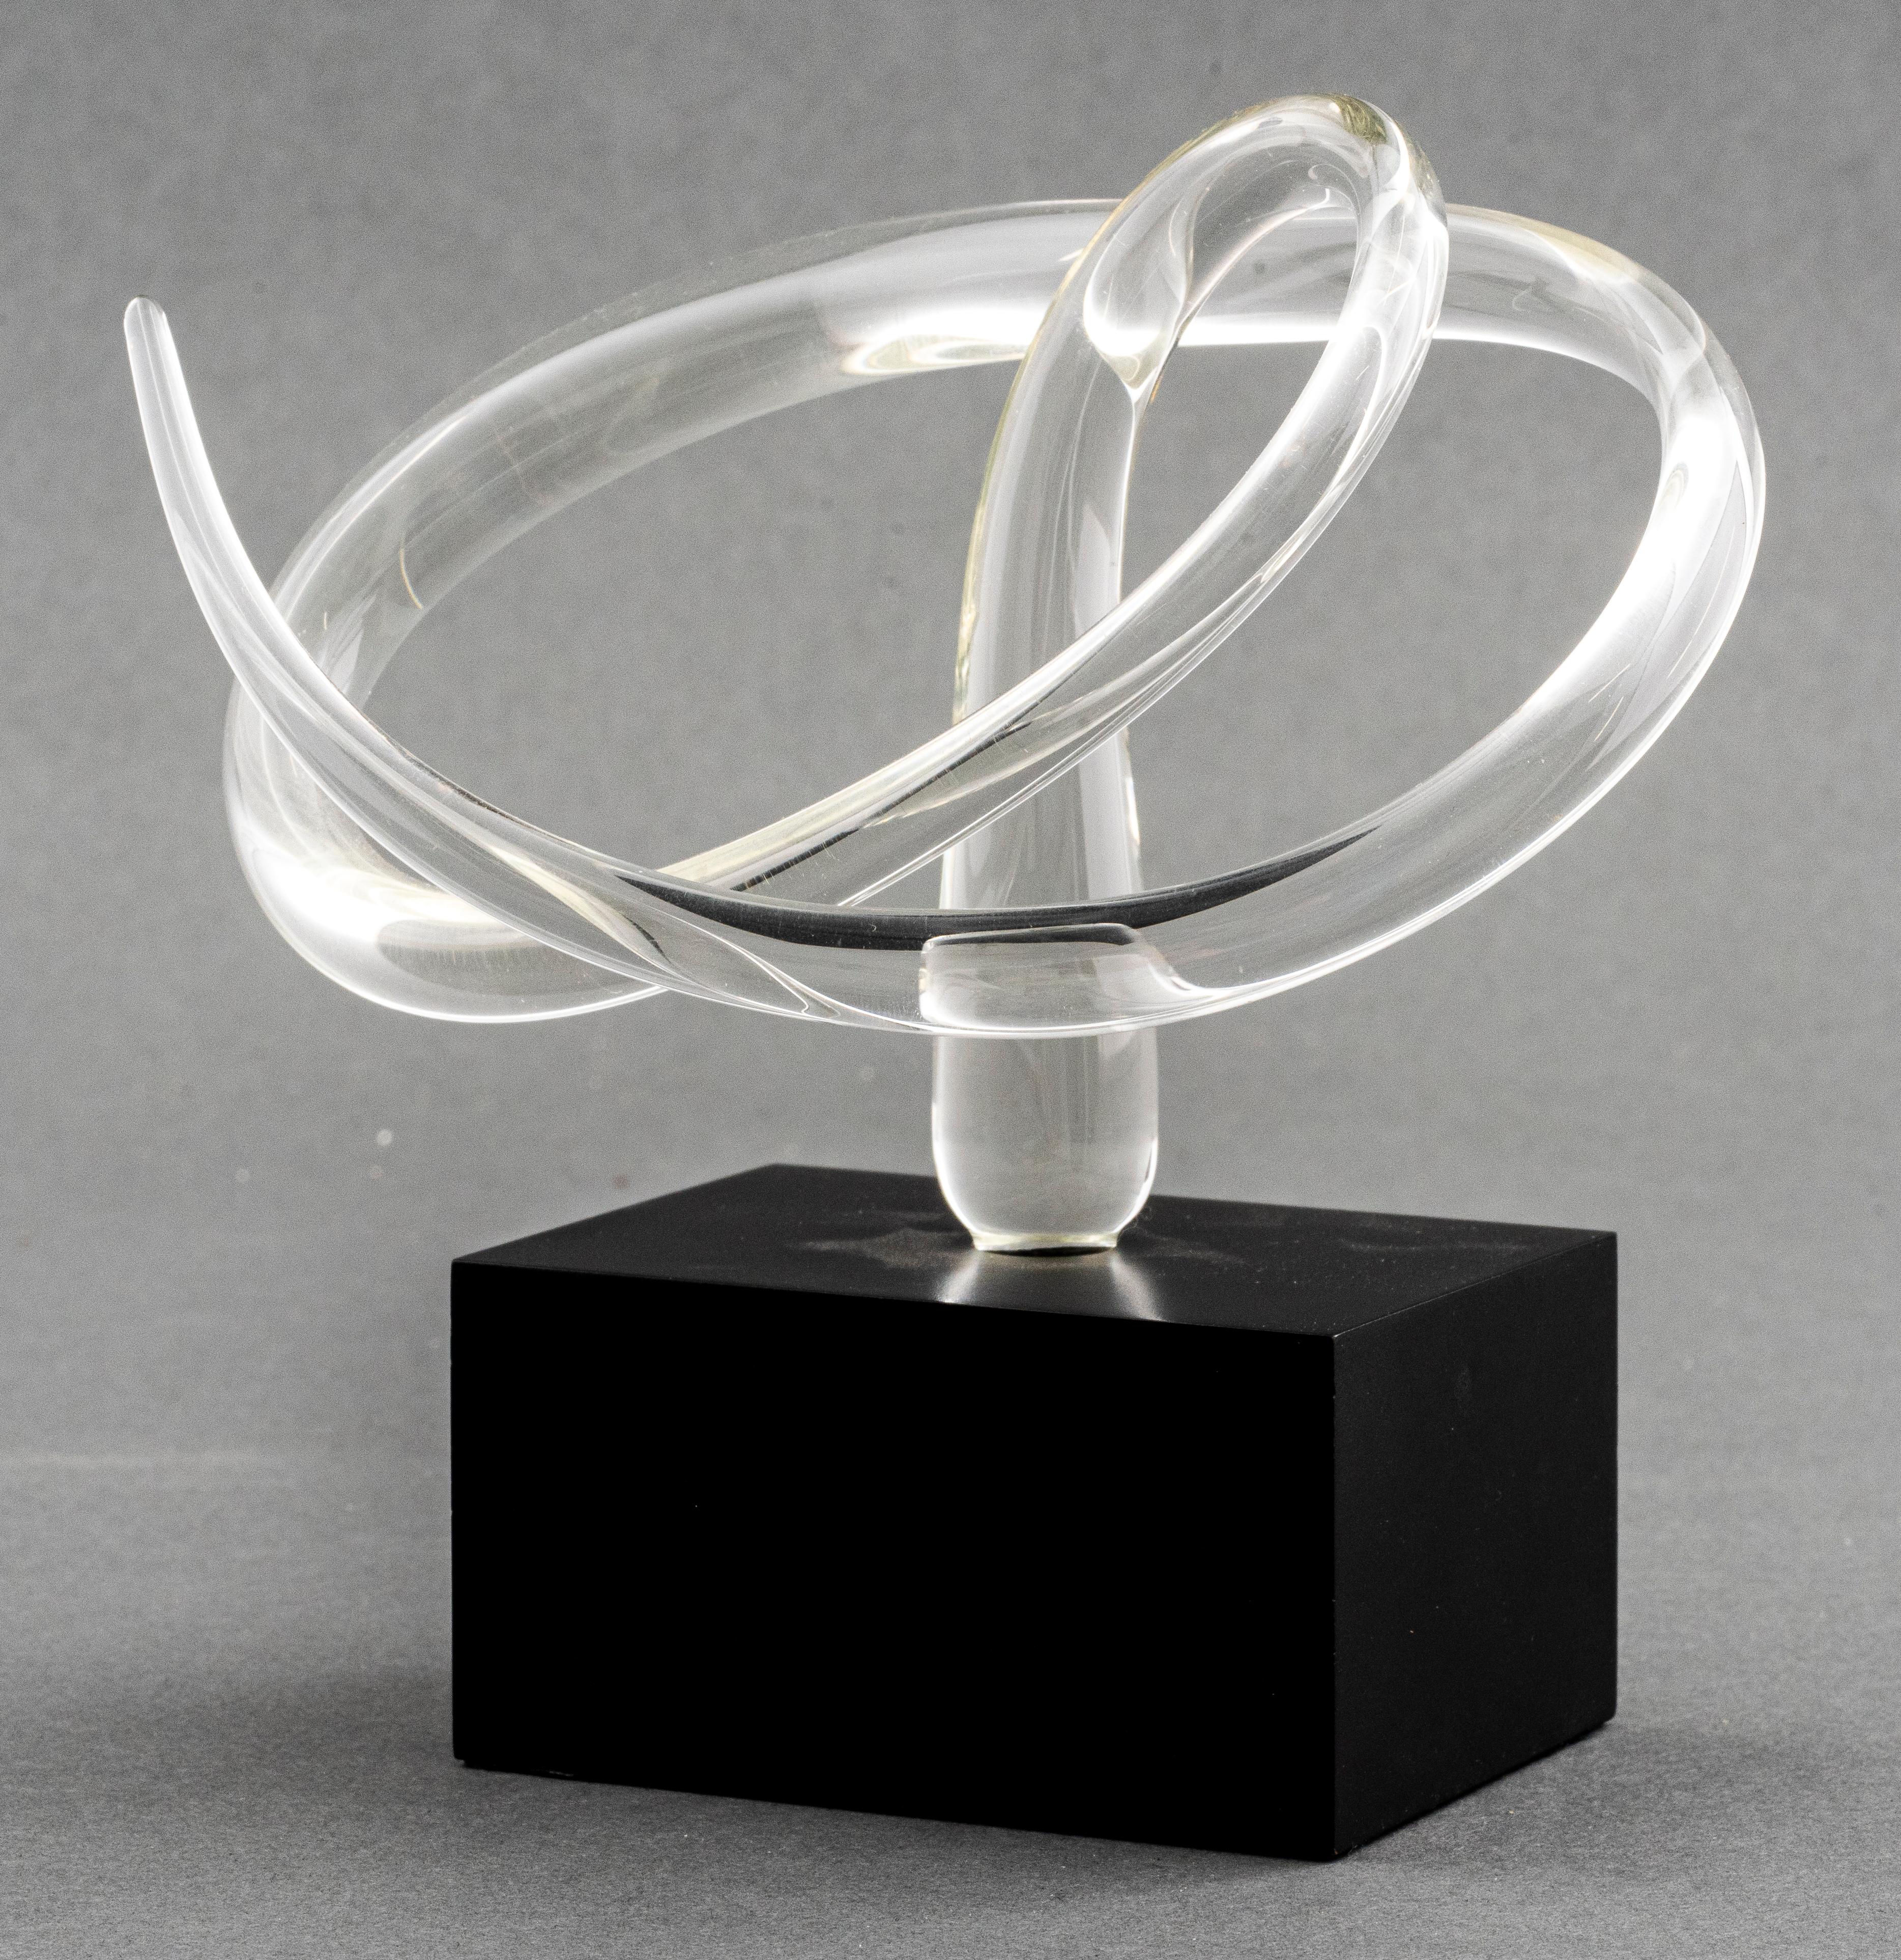 Warner Whitfield and Beatriz Kelemen, Abstract Glass Sculpture, 1990, signed.
Measures: 6